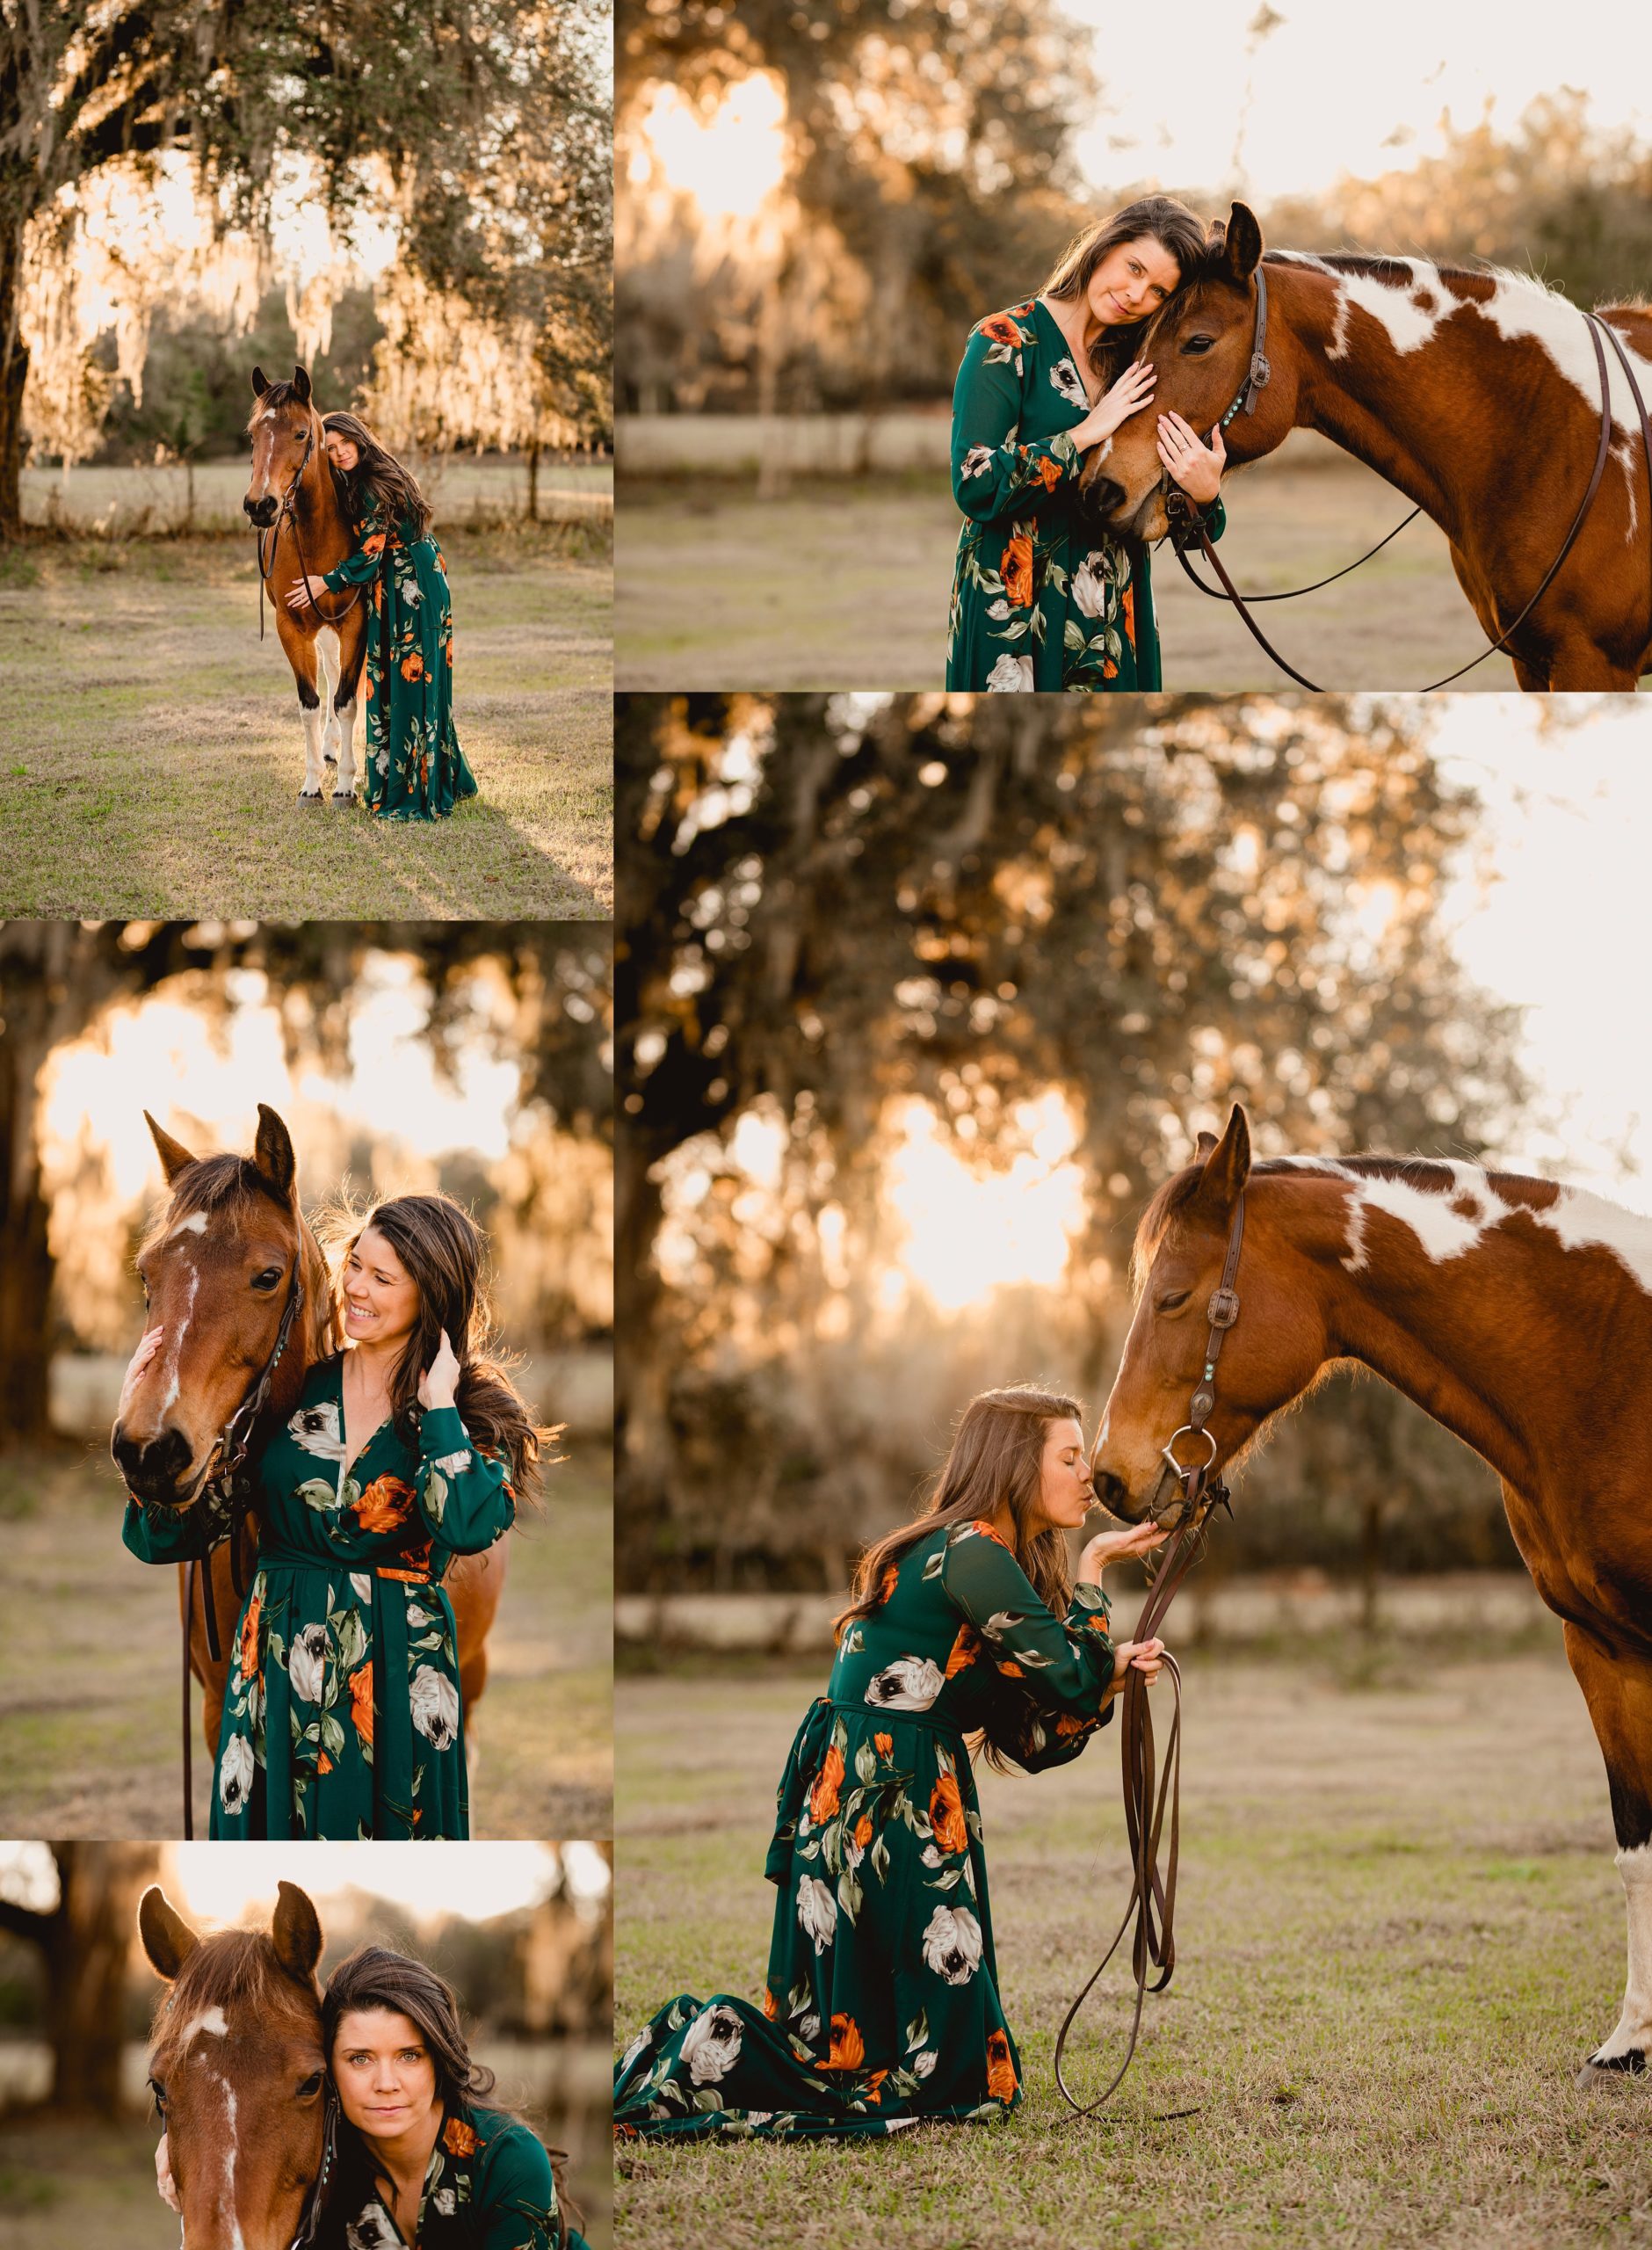 Posing ideas with woman and horse at sunset with long flowy dress. Baltic born green floral dress. APHA Mare. Tallahassee professional photographer.